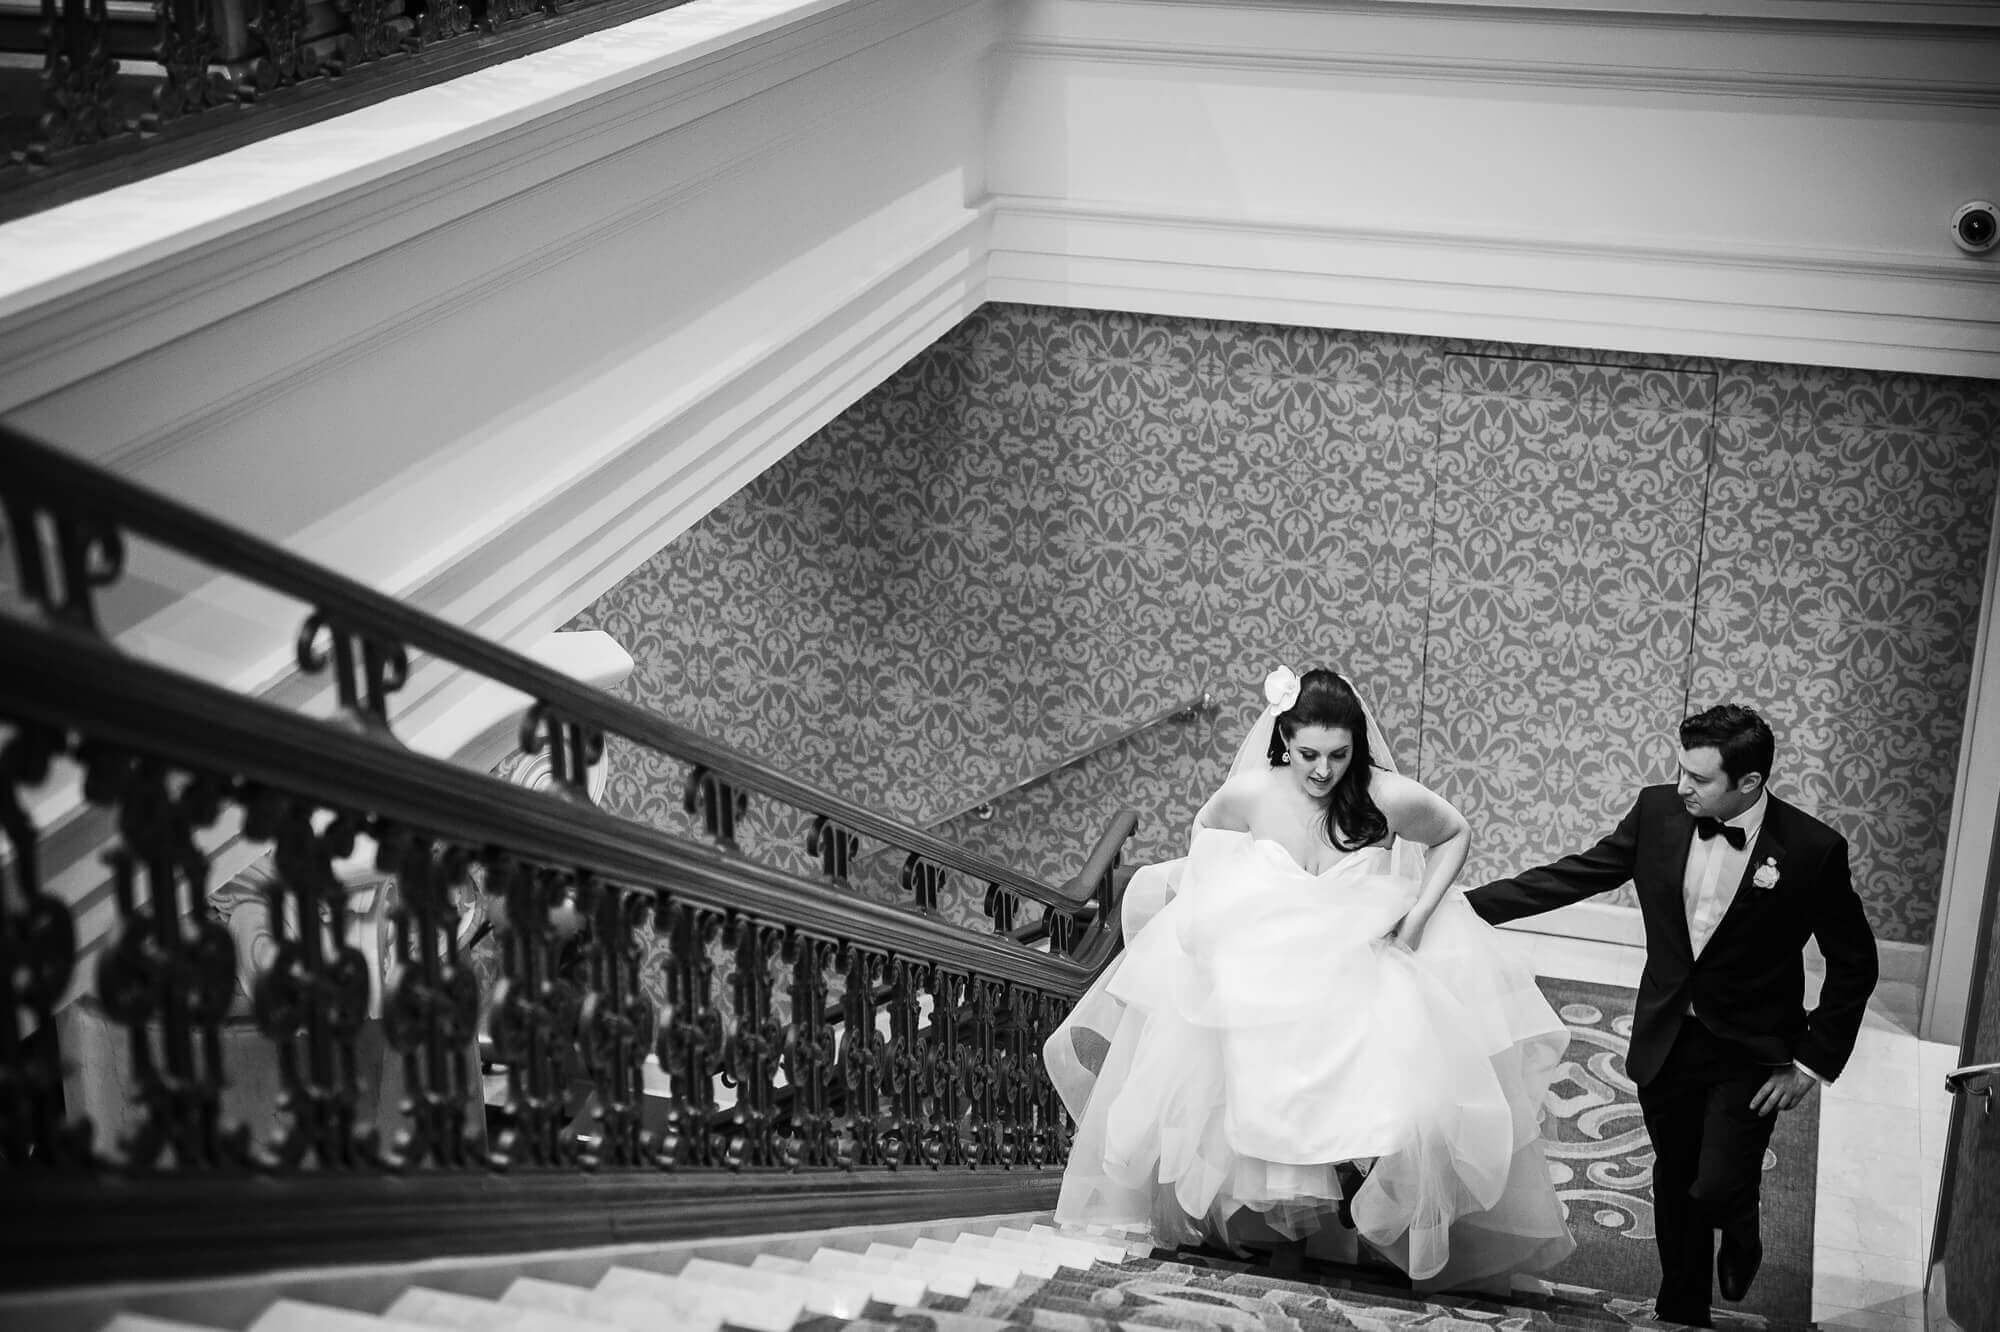 Black and white portrait of the groom helping the bride carry her dress up the stairs at the Omni King Edward Hotel in Toronto